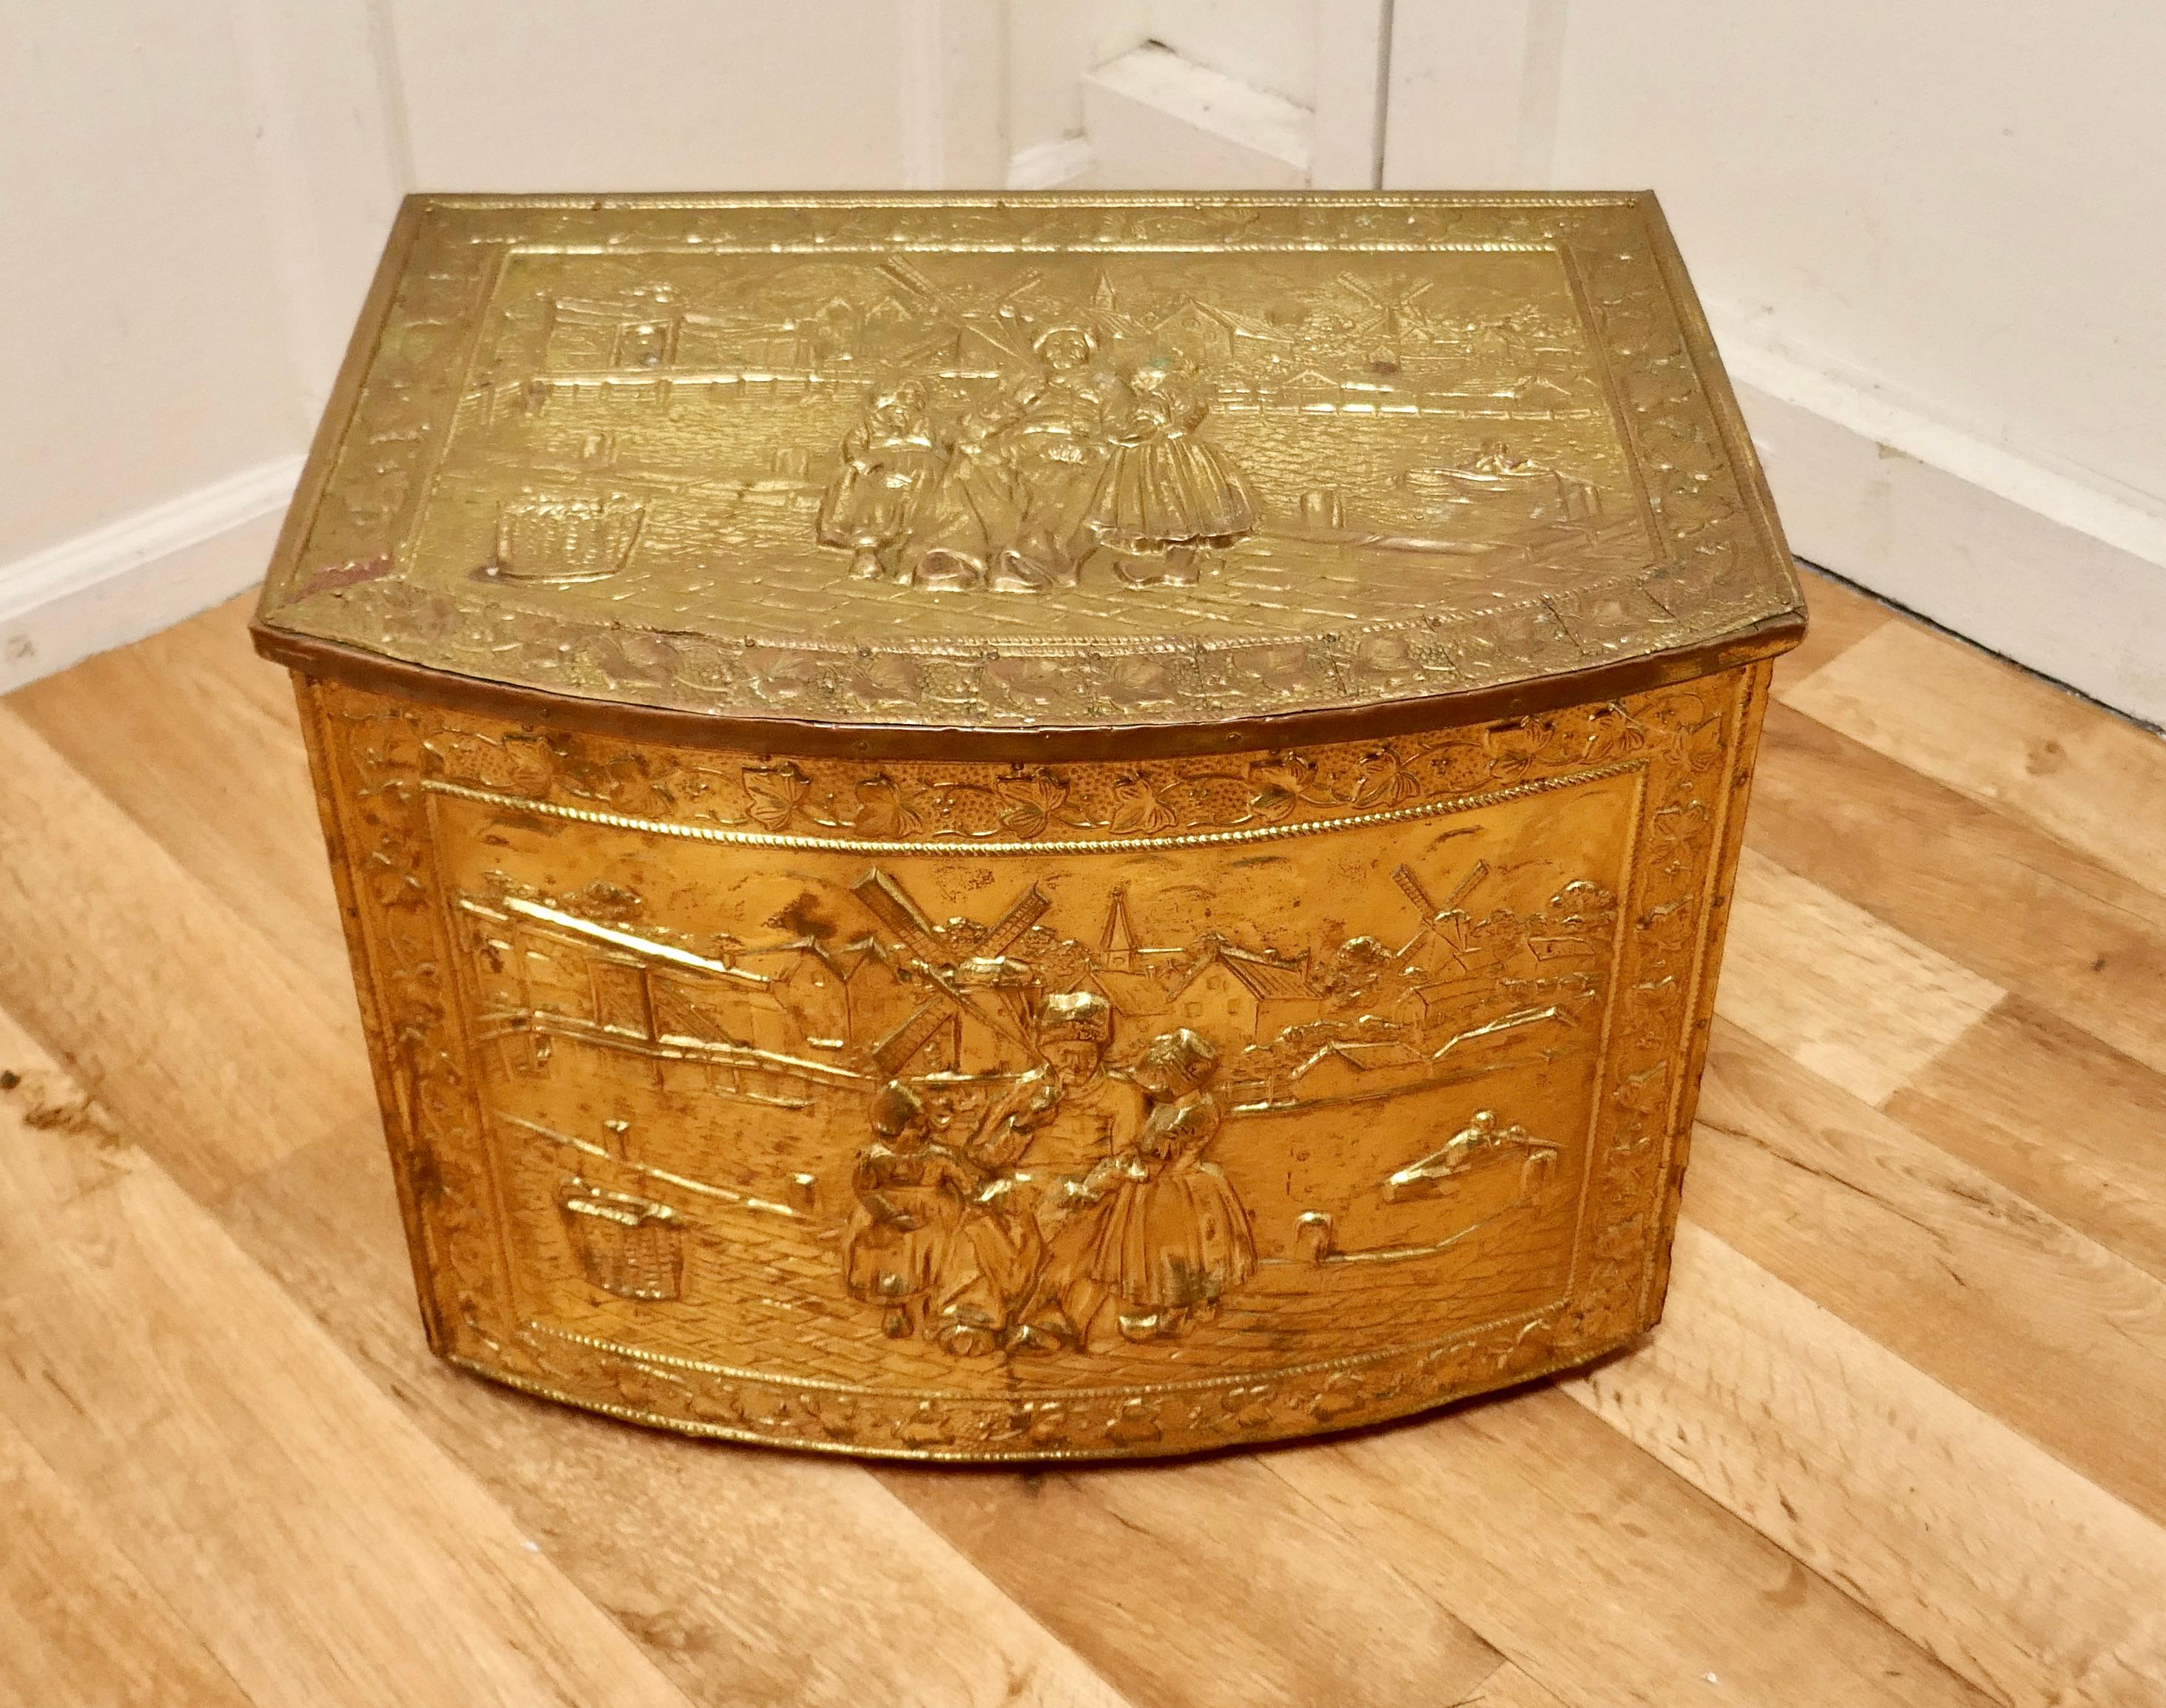 Embossed Arts and Crafts brass log or coal box with dutch scenes 


This is a lovely chest is made in Brass with a wooden lining, the beaten brass is embossed with country scenes showing windmills and characters in Dutch costume
This is an old